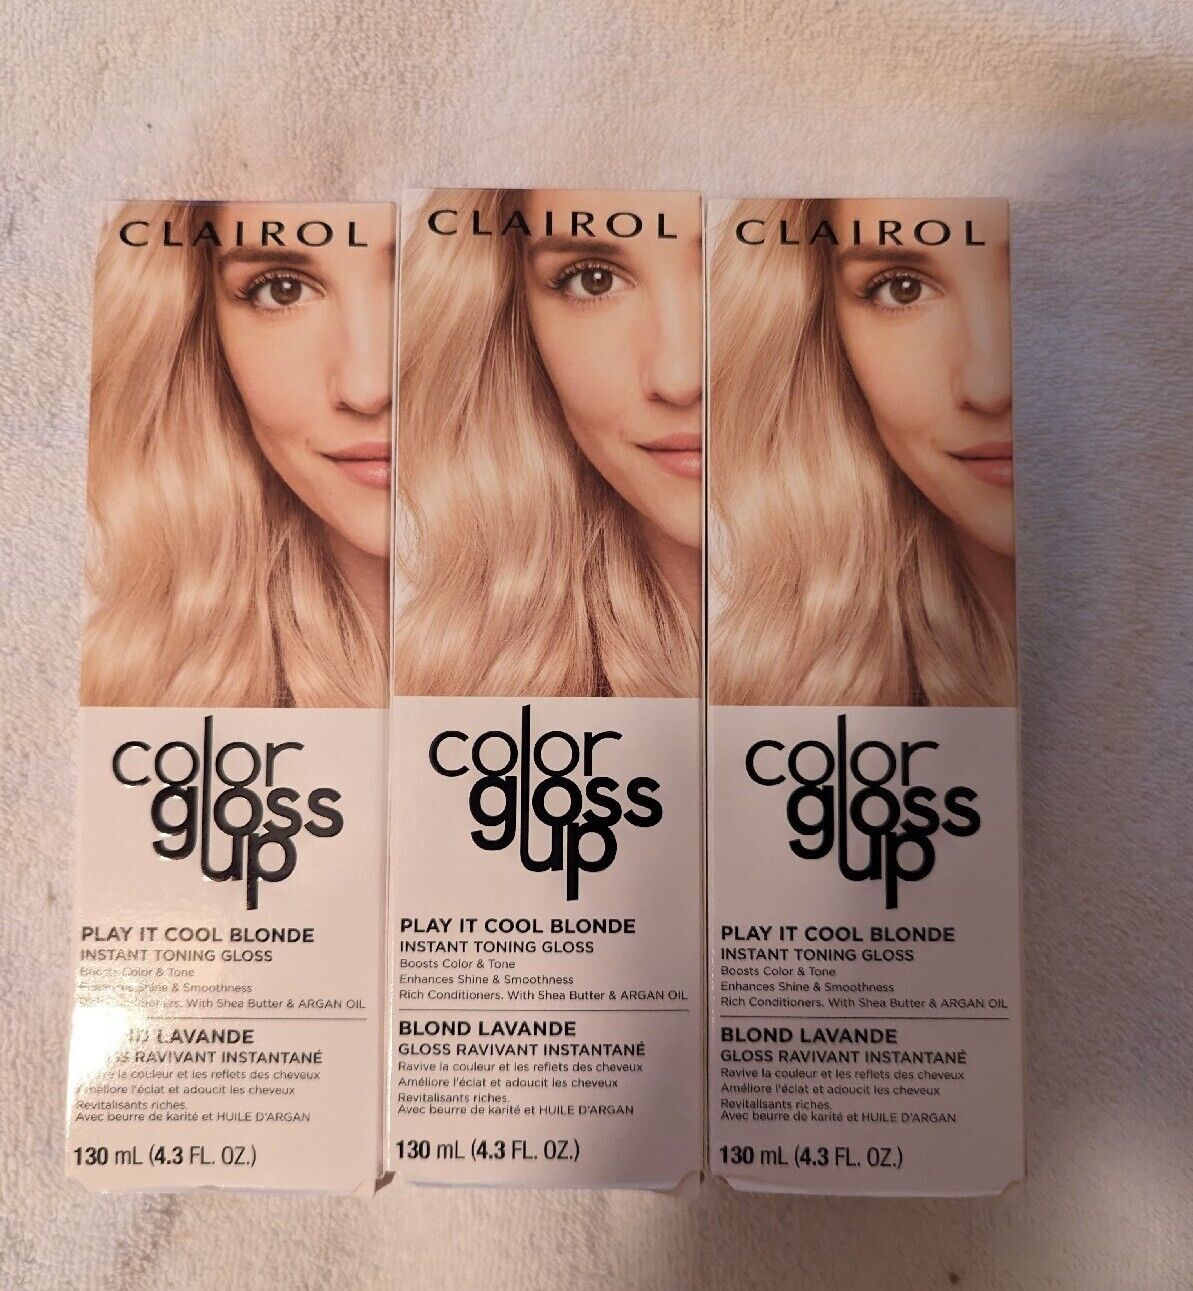 Primary image for Clairol Color Gloss Up Play it Cool Blonde Instant Toning Gloss 4.3oz. LOT OF 3